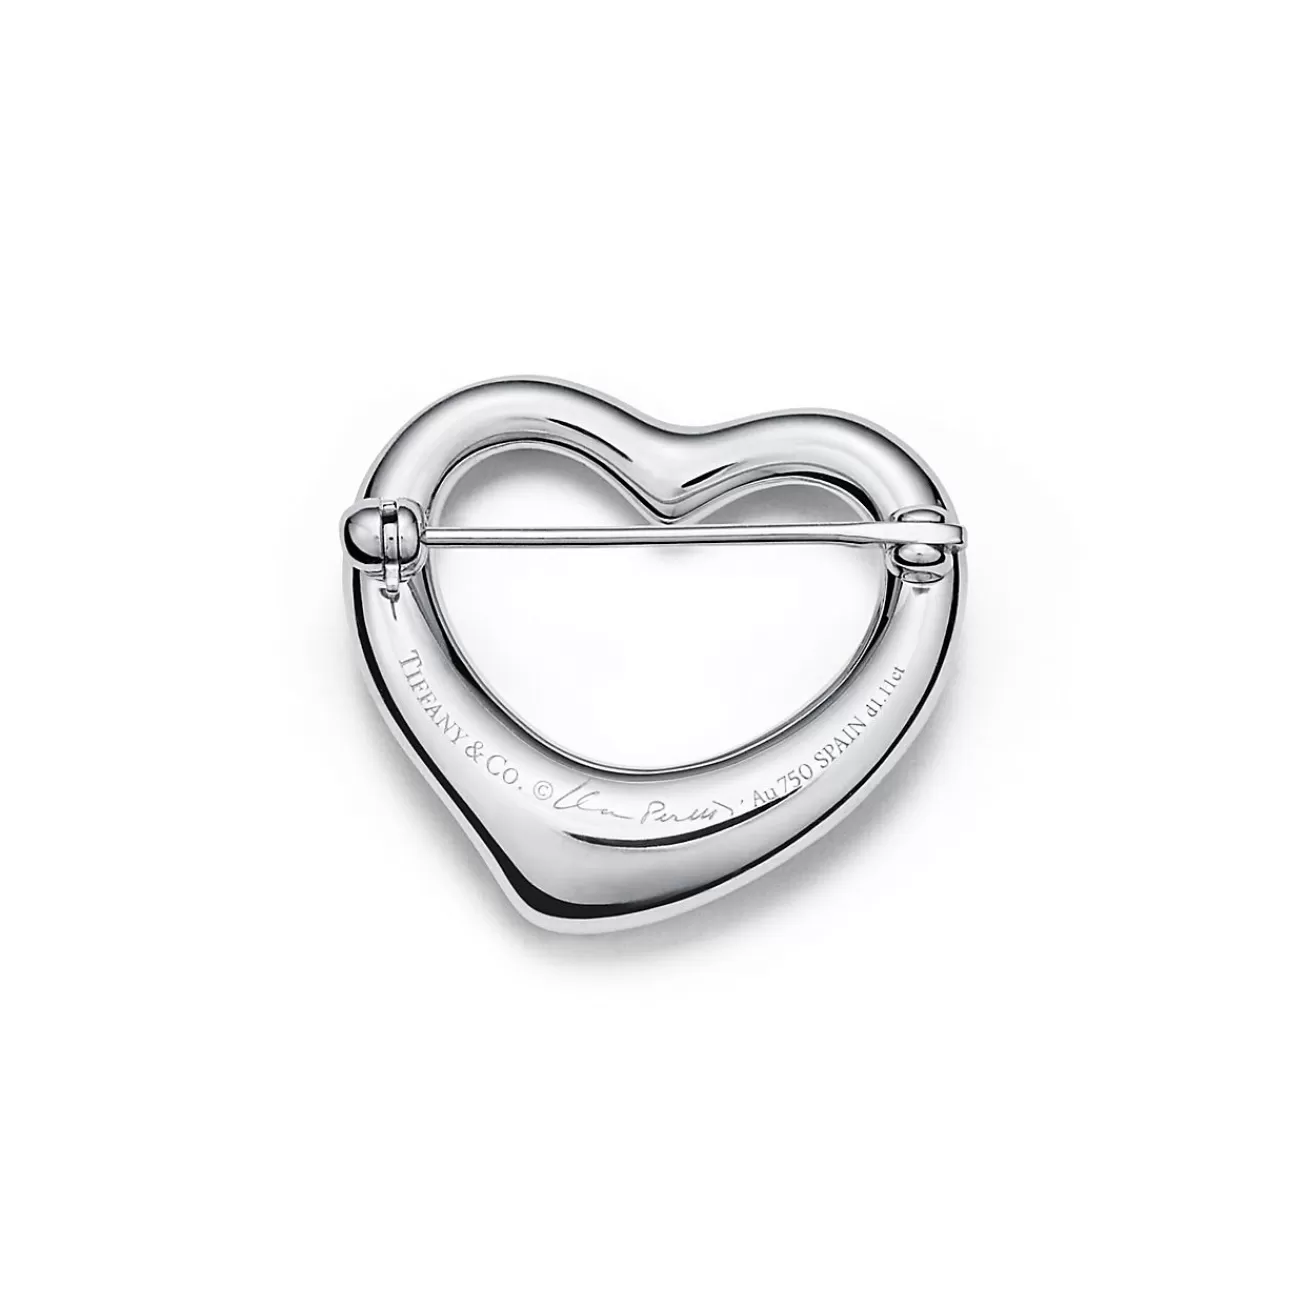 Tiffany & Co. Elsa Peretti® Open Heart Brooch in Platinum with Pavé Diamonds | ^ Brooches | Platinum Jewelry